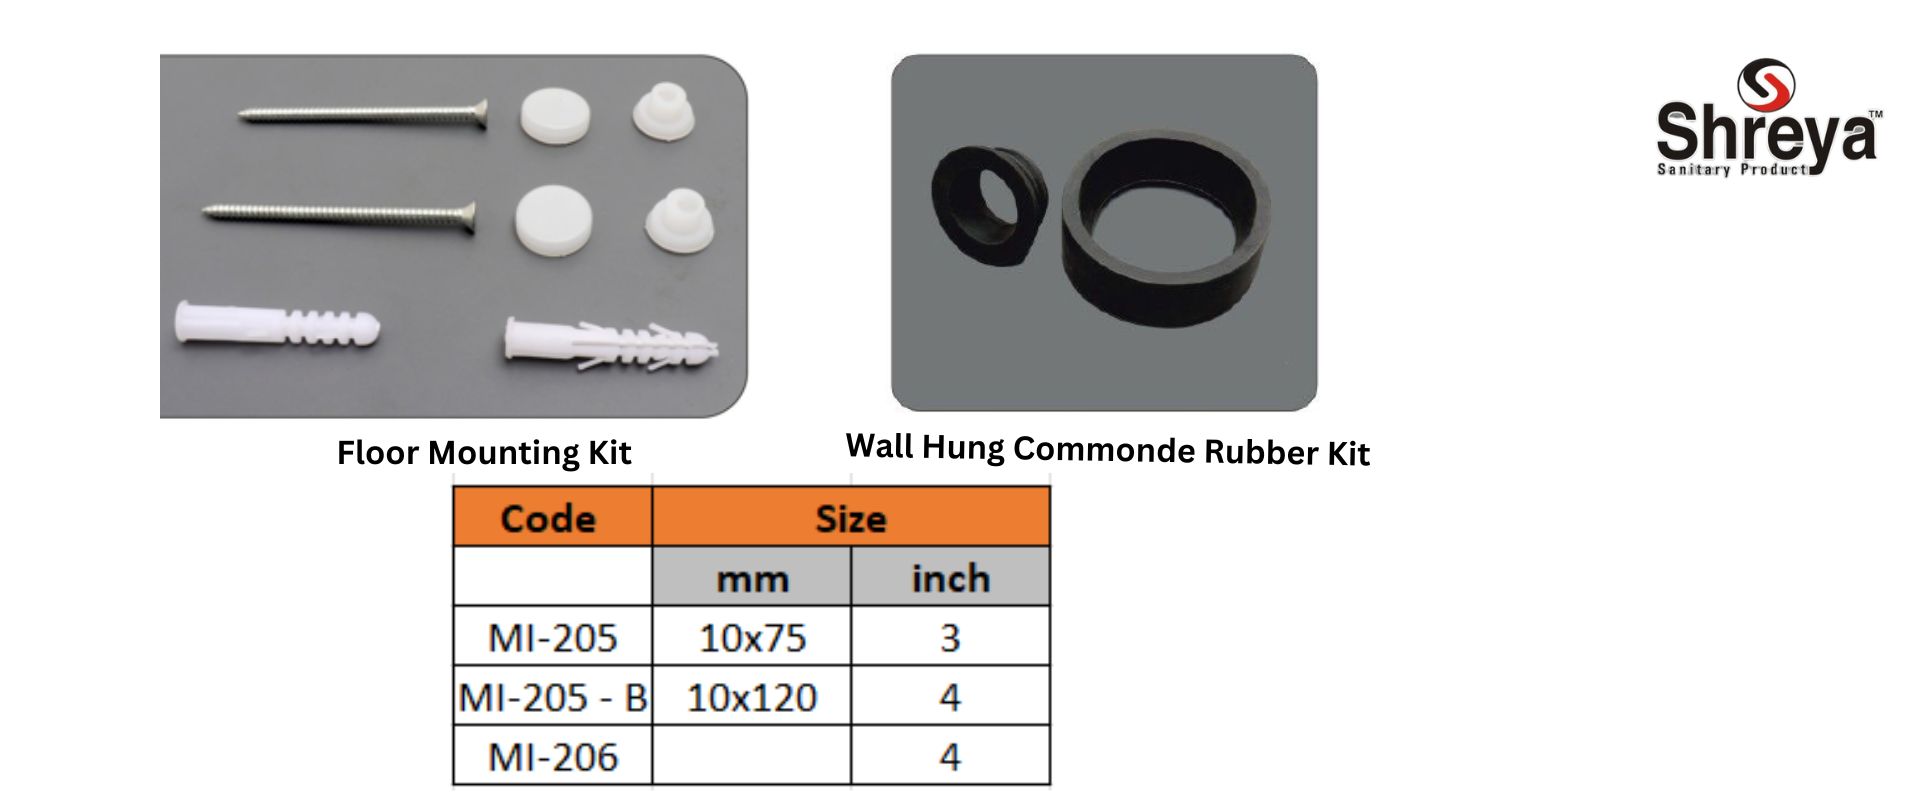 Wall Hung Commode Rubber Kit